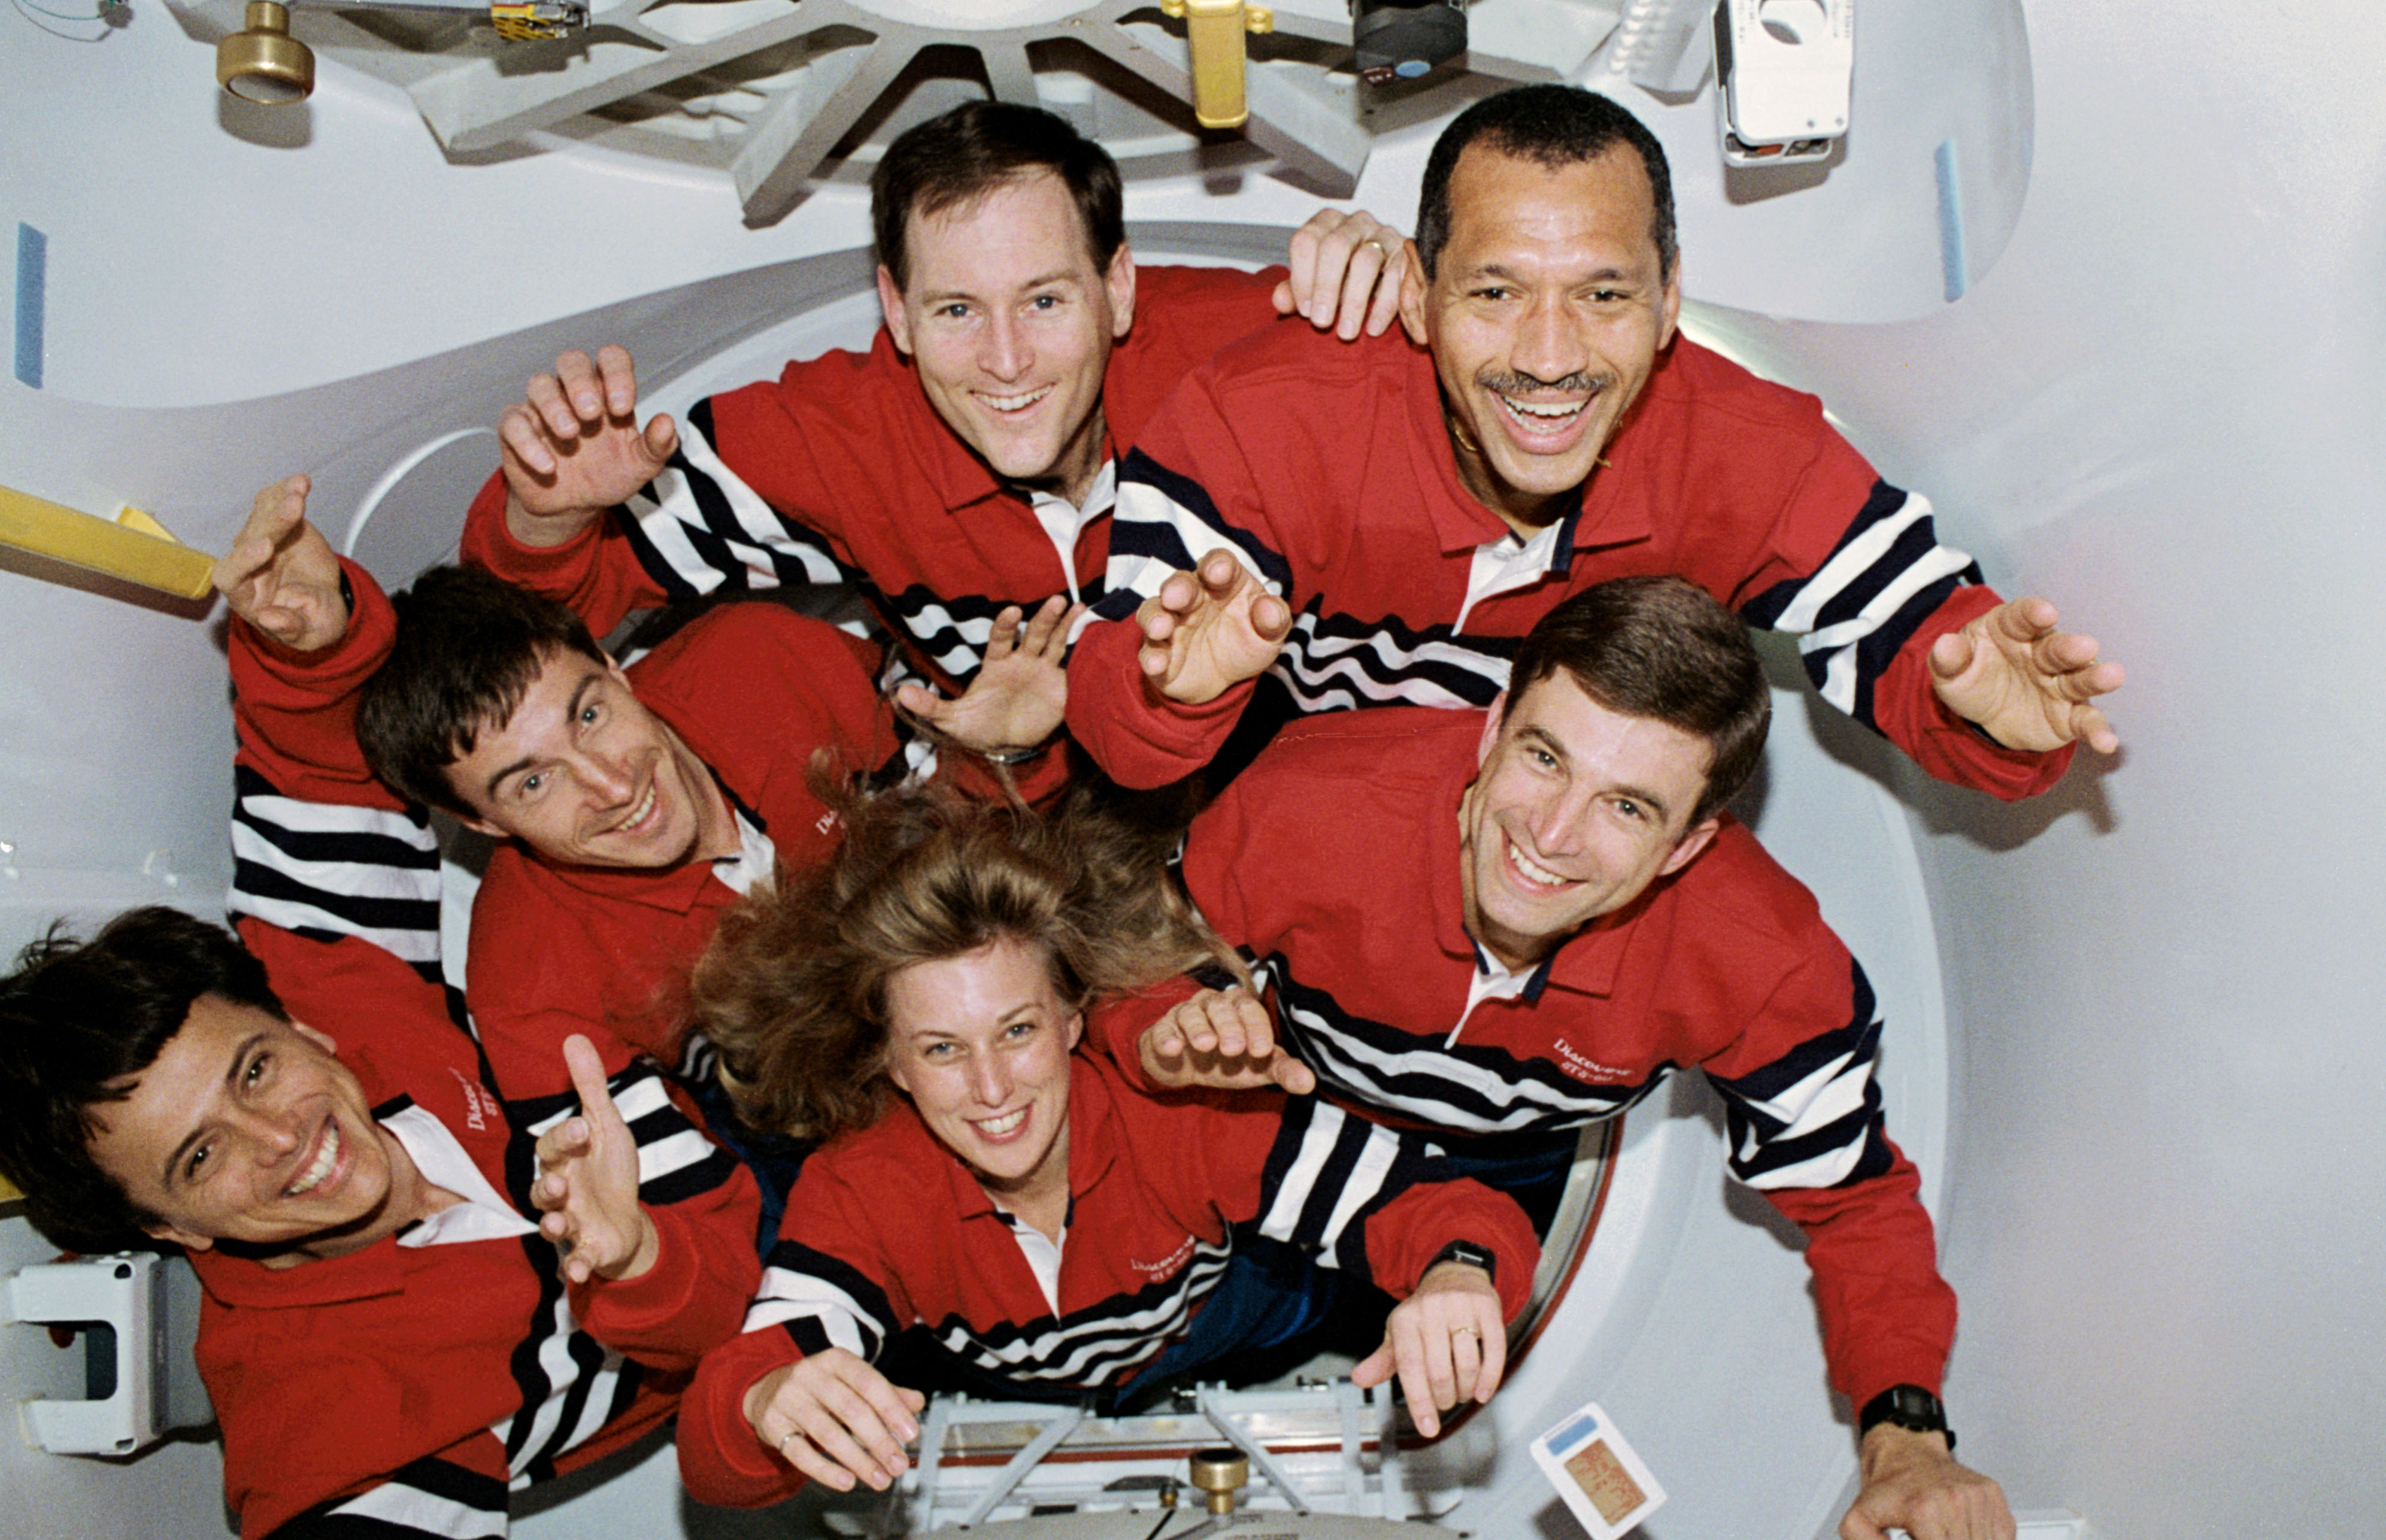 The STS-60 crew members pose near the end of their successful mission